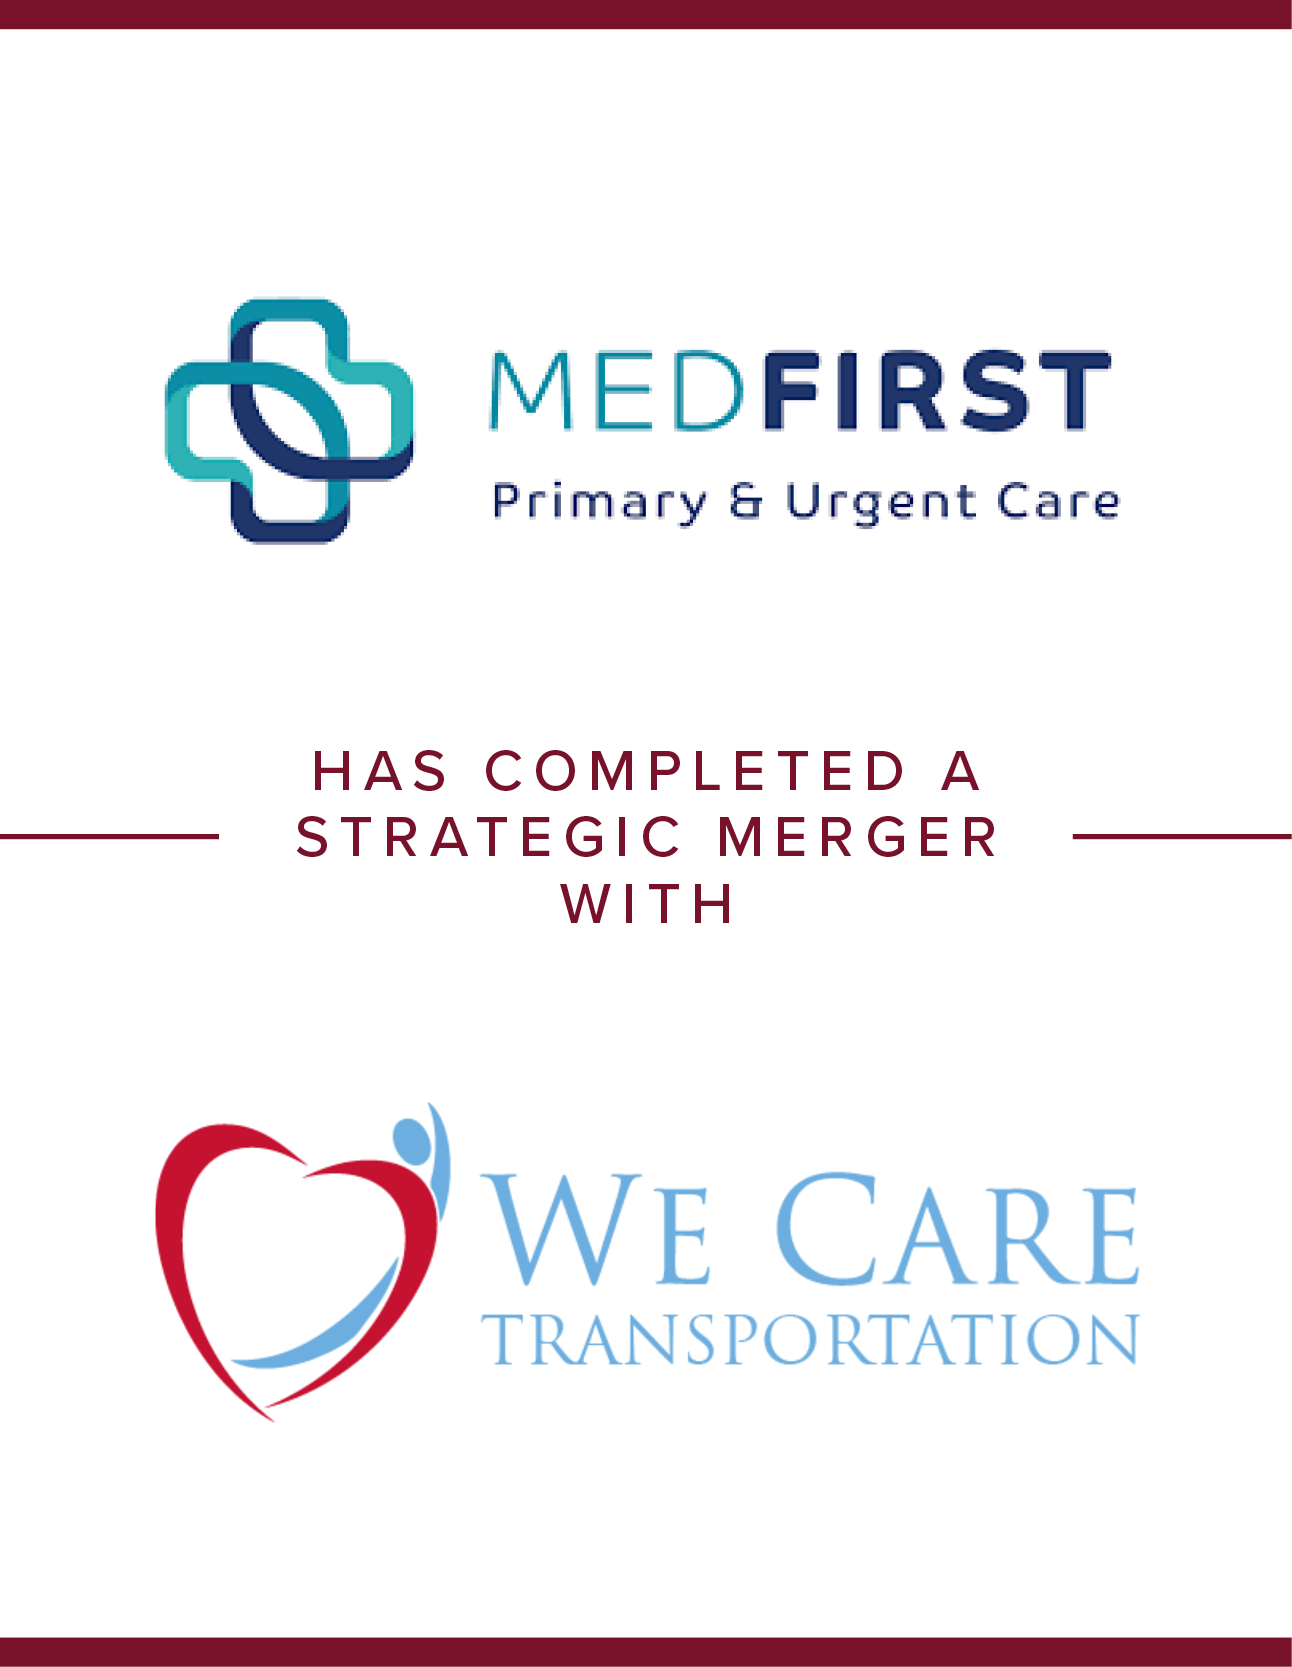 Medfirst Primary & Urgent Care Transaction Tombstone